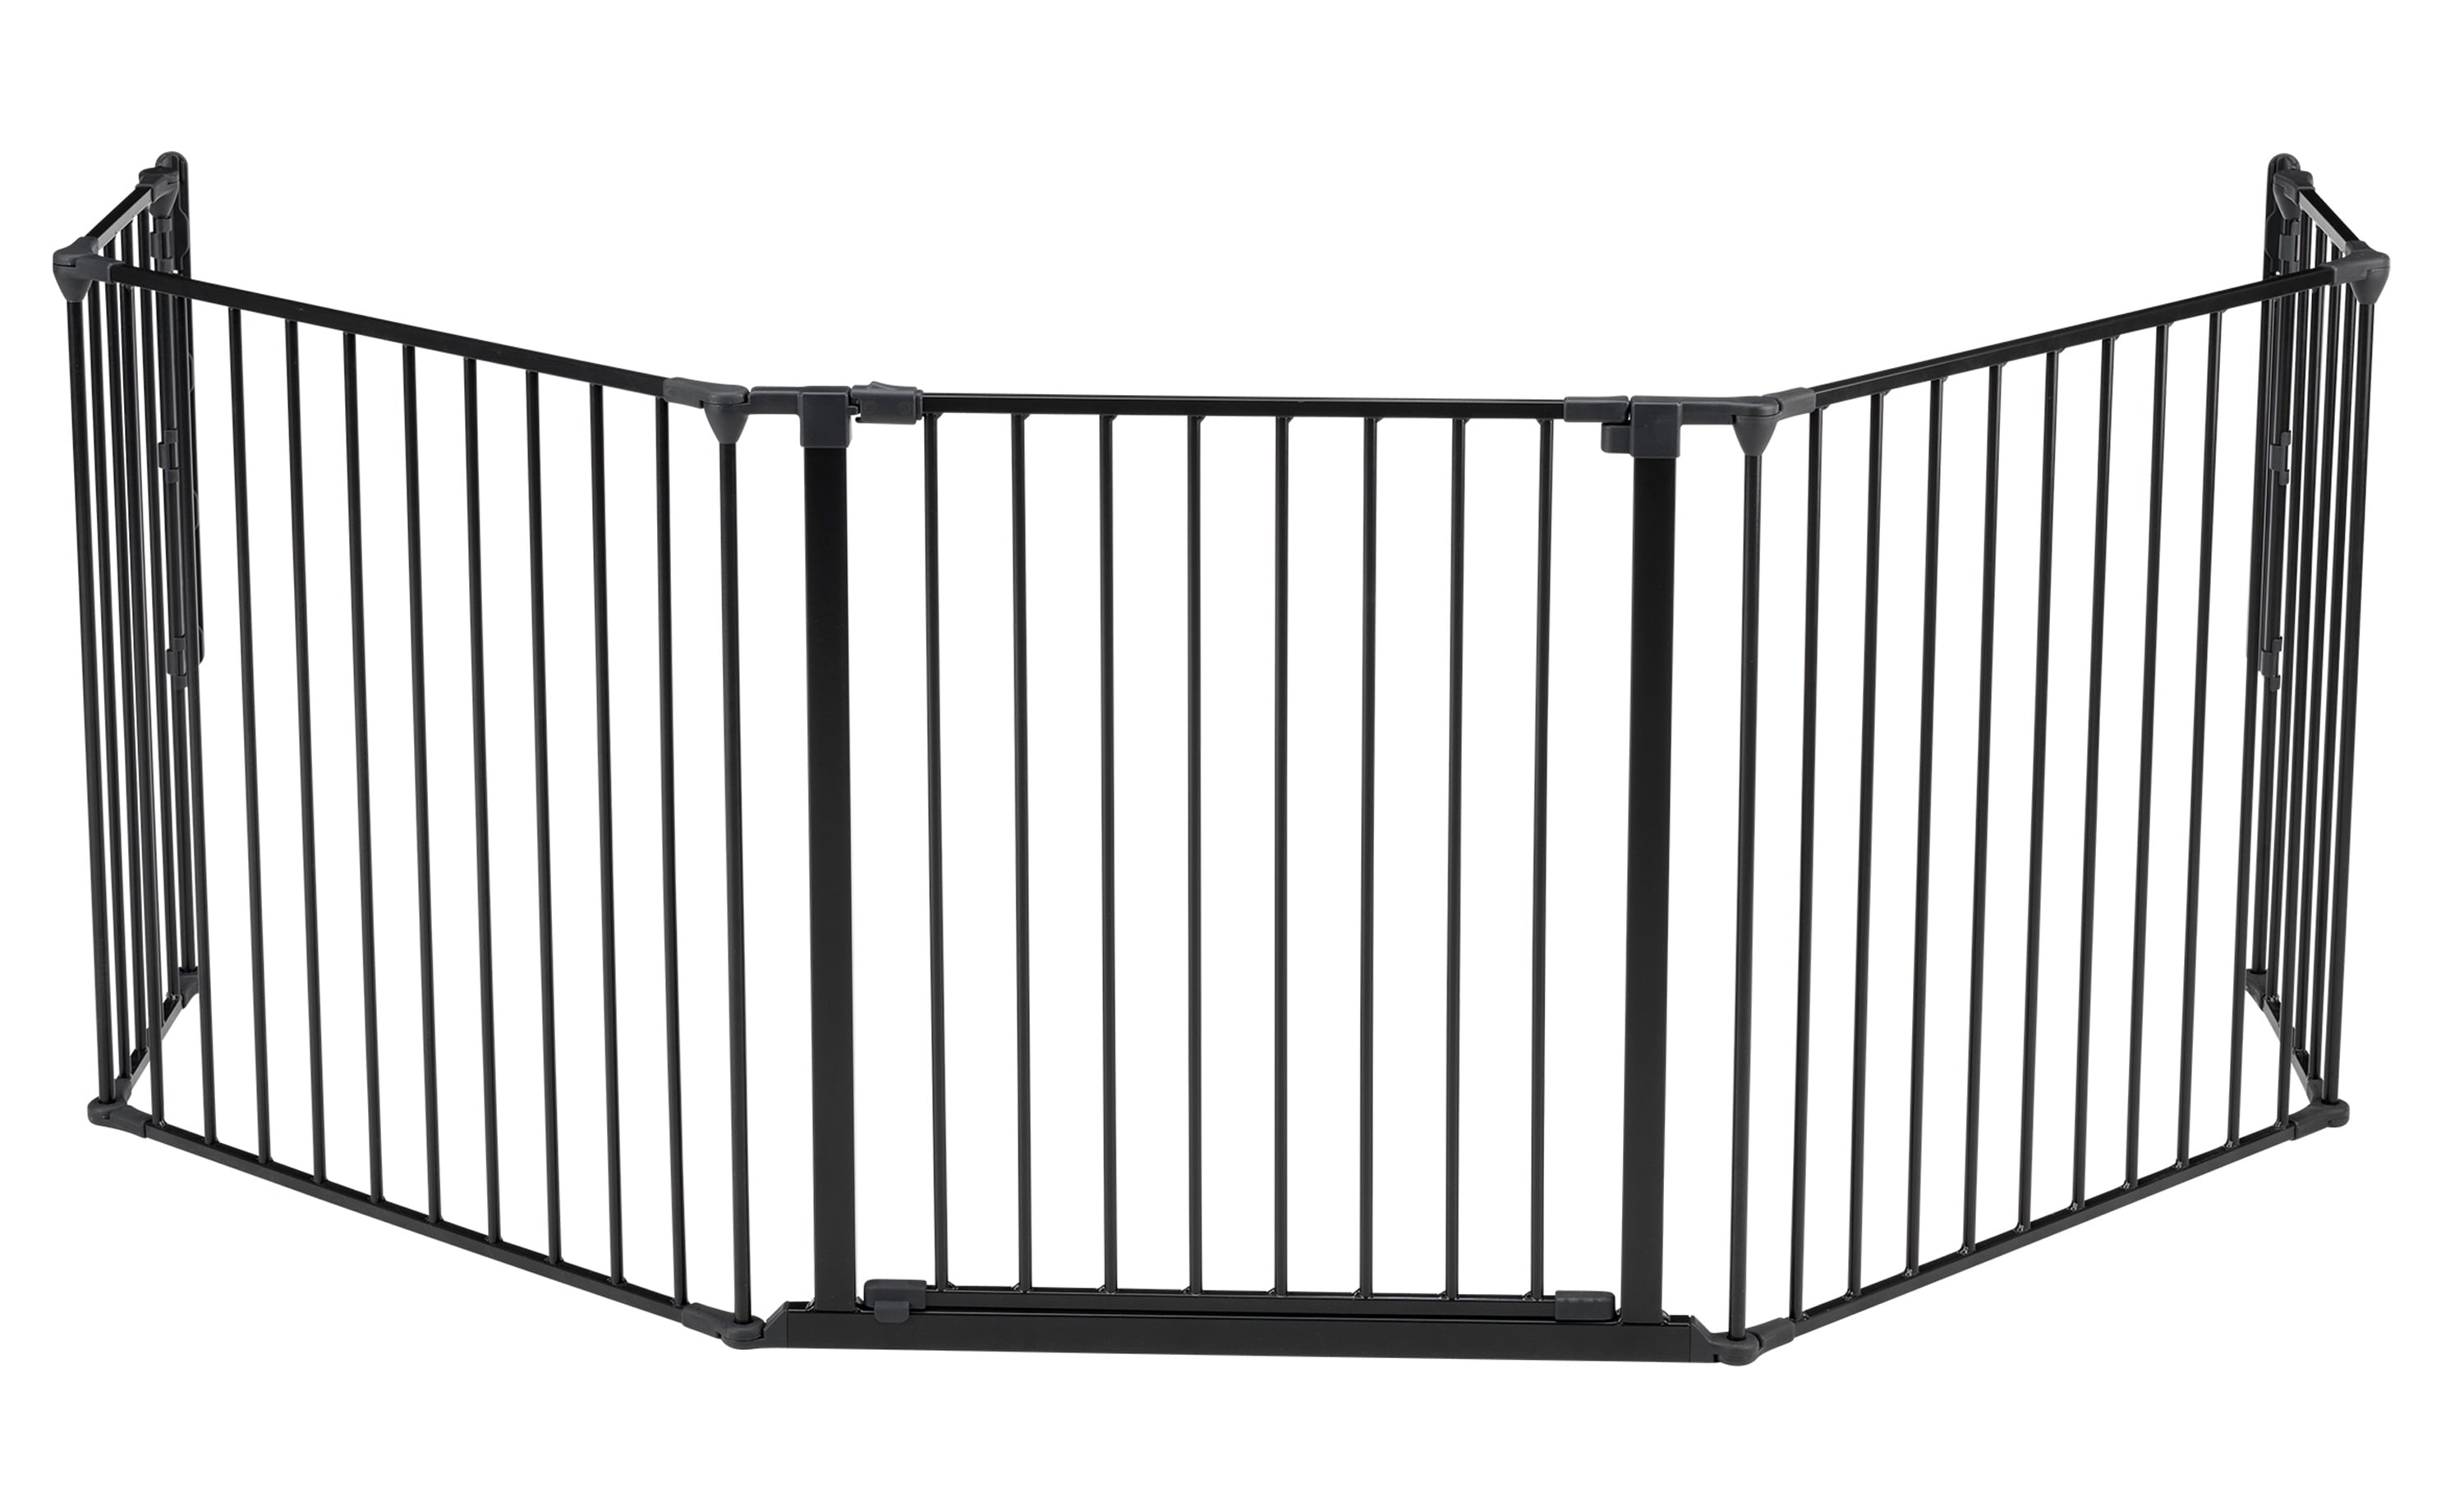 5 Panel Fireplace Fence Safety Gate Hearth Gate Pet Gate Guard W